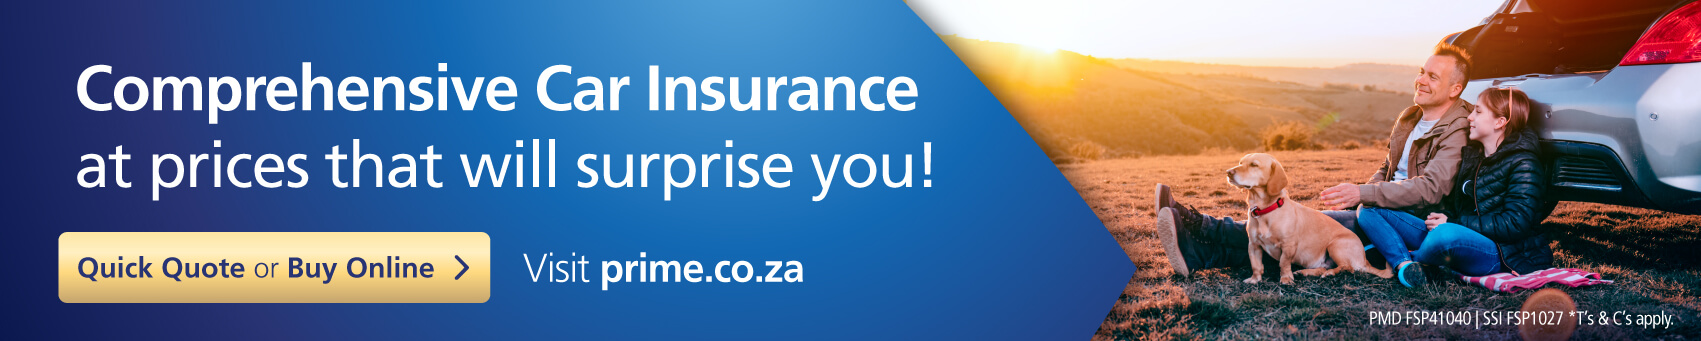 Affordable car insurance with PMD